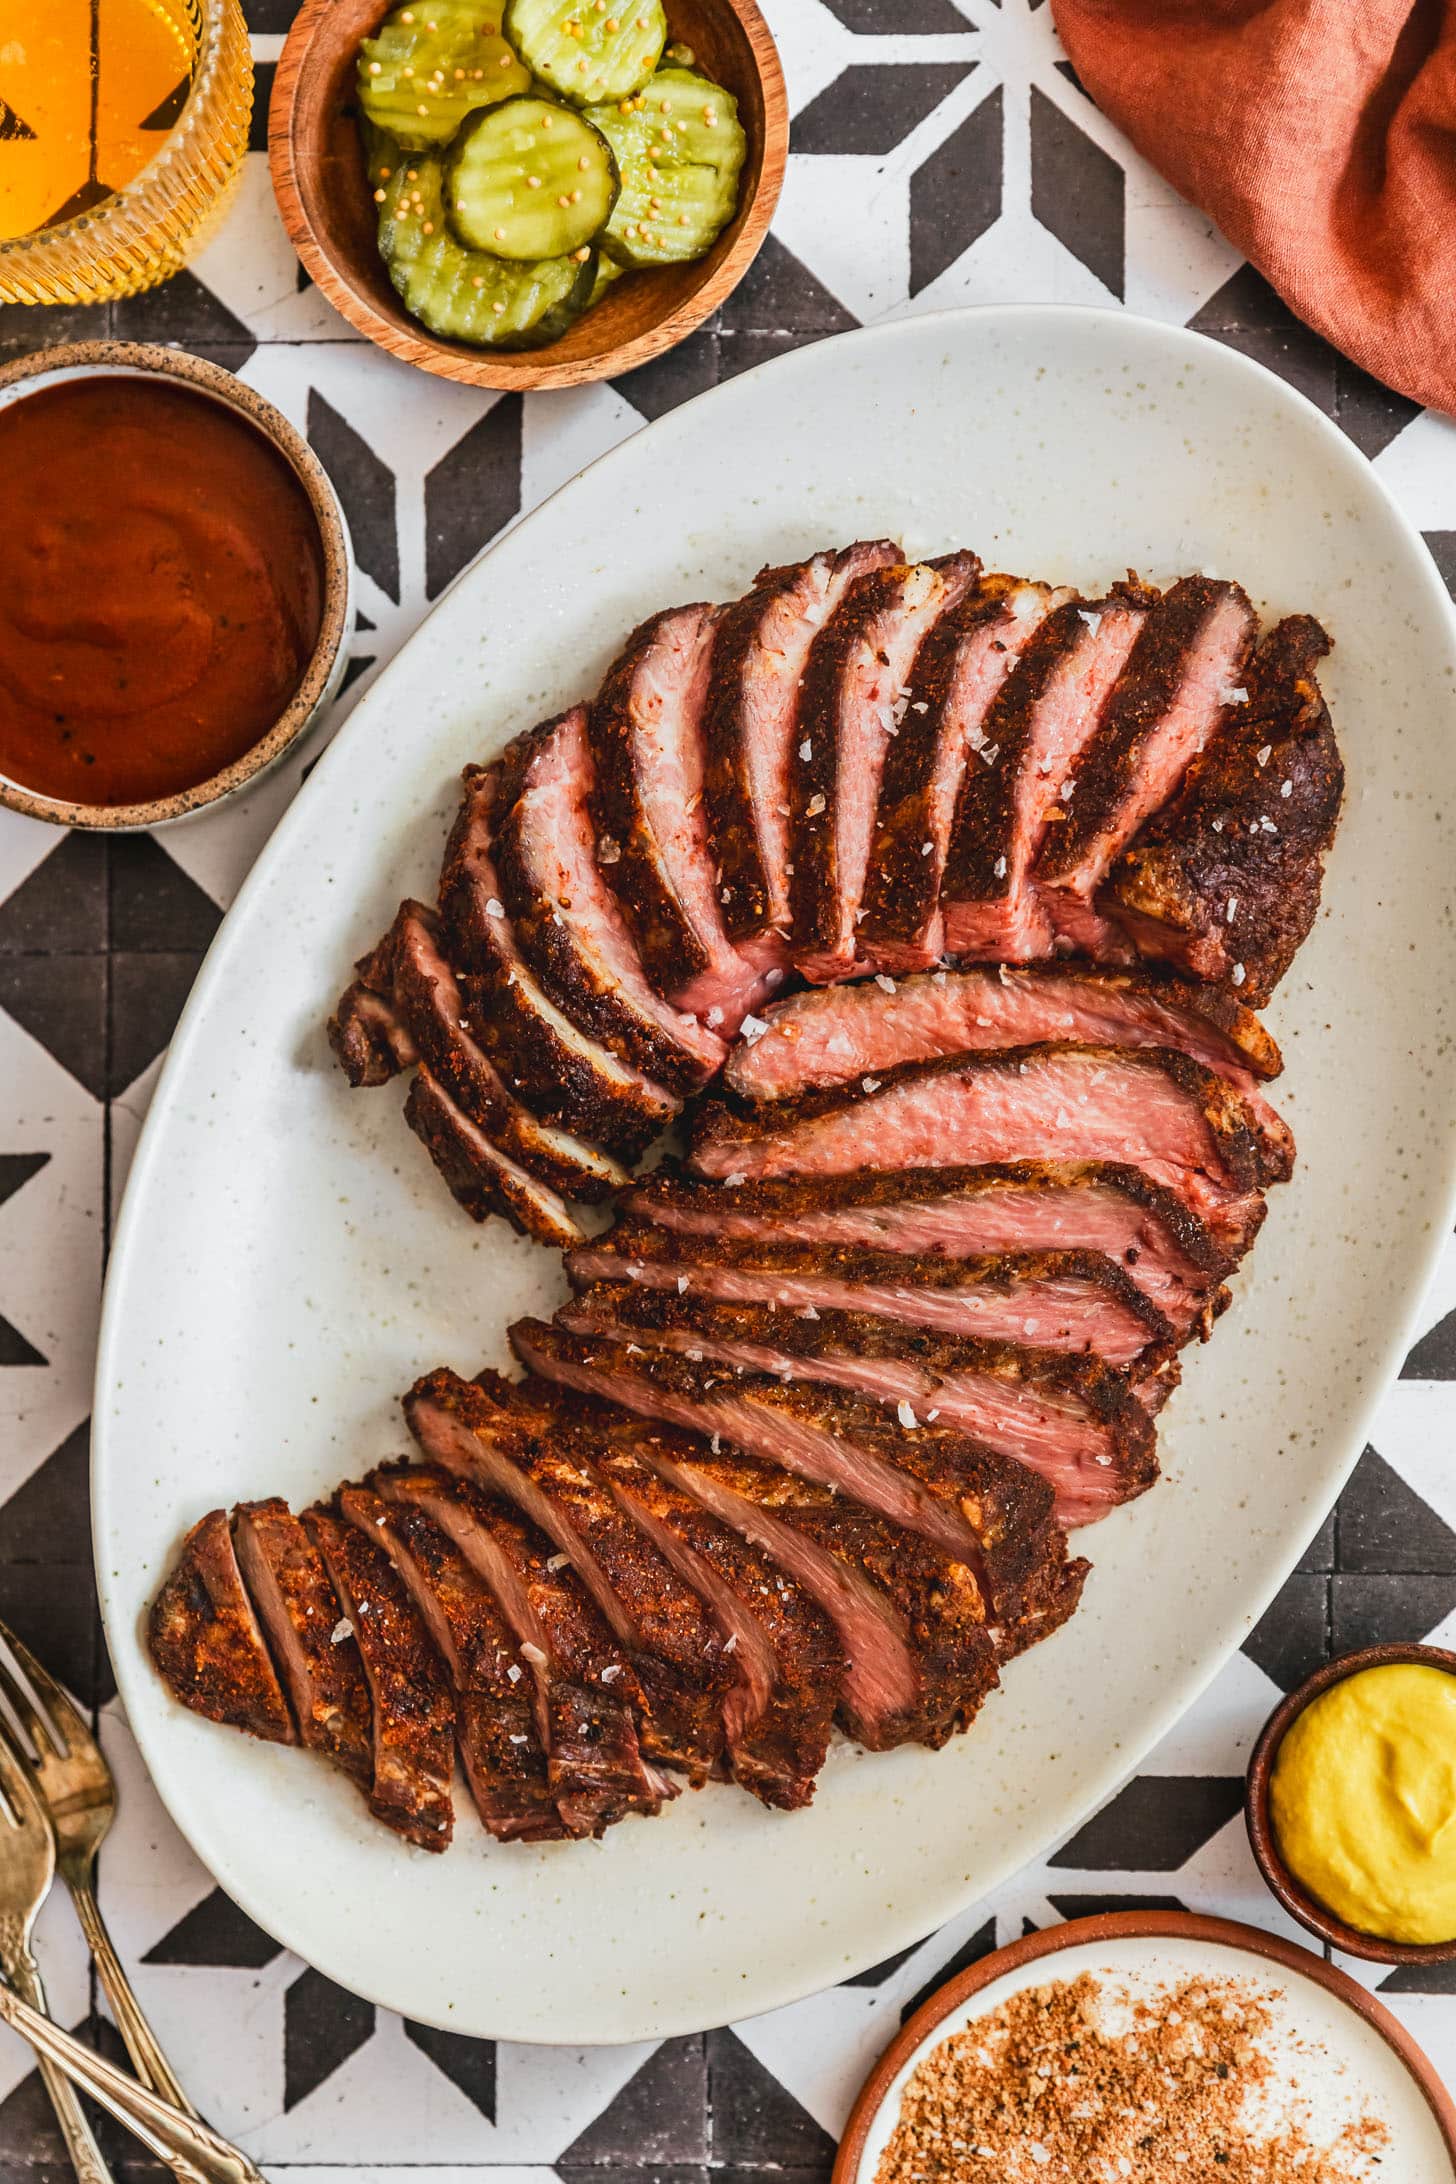 A white tray of smoked tri-tip on a black and white tile counter next to a wood bowl of pickles, brown bowl of BBQ sauce, glass of beer, orange linen, and white bowl of BBQ rub.